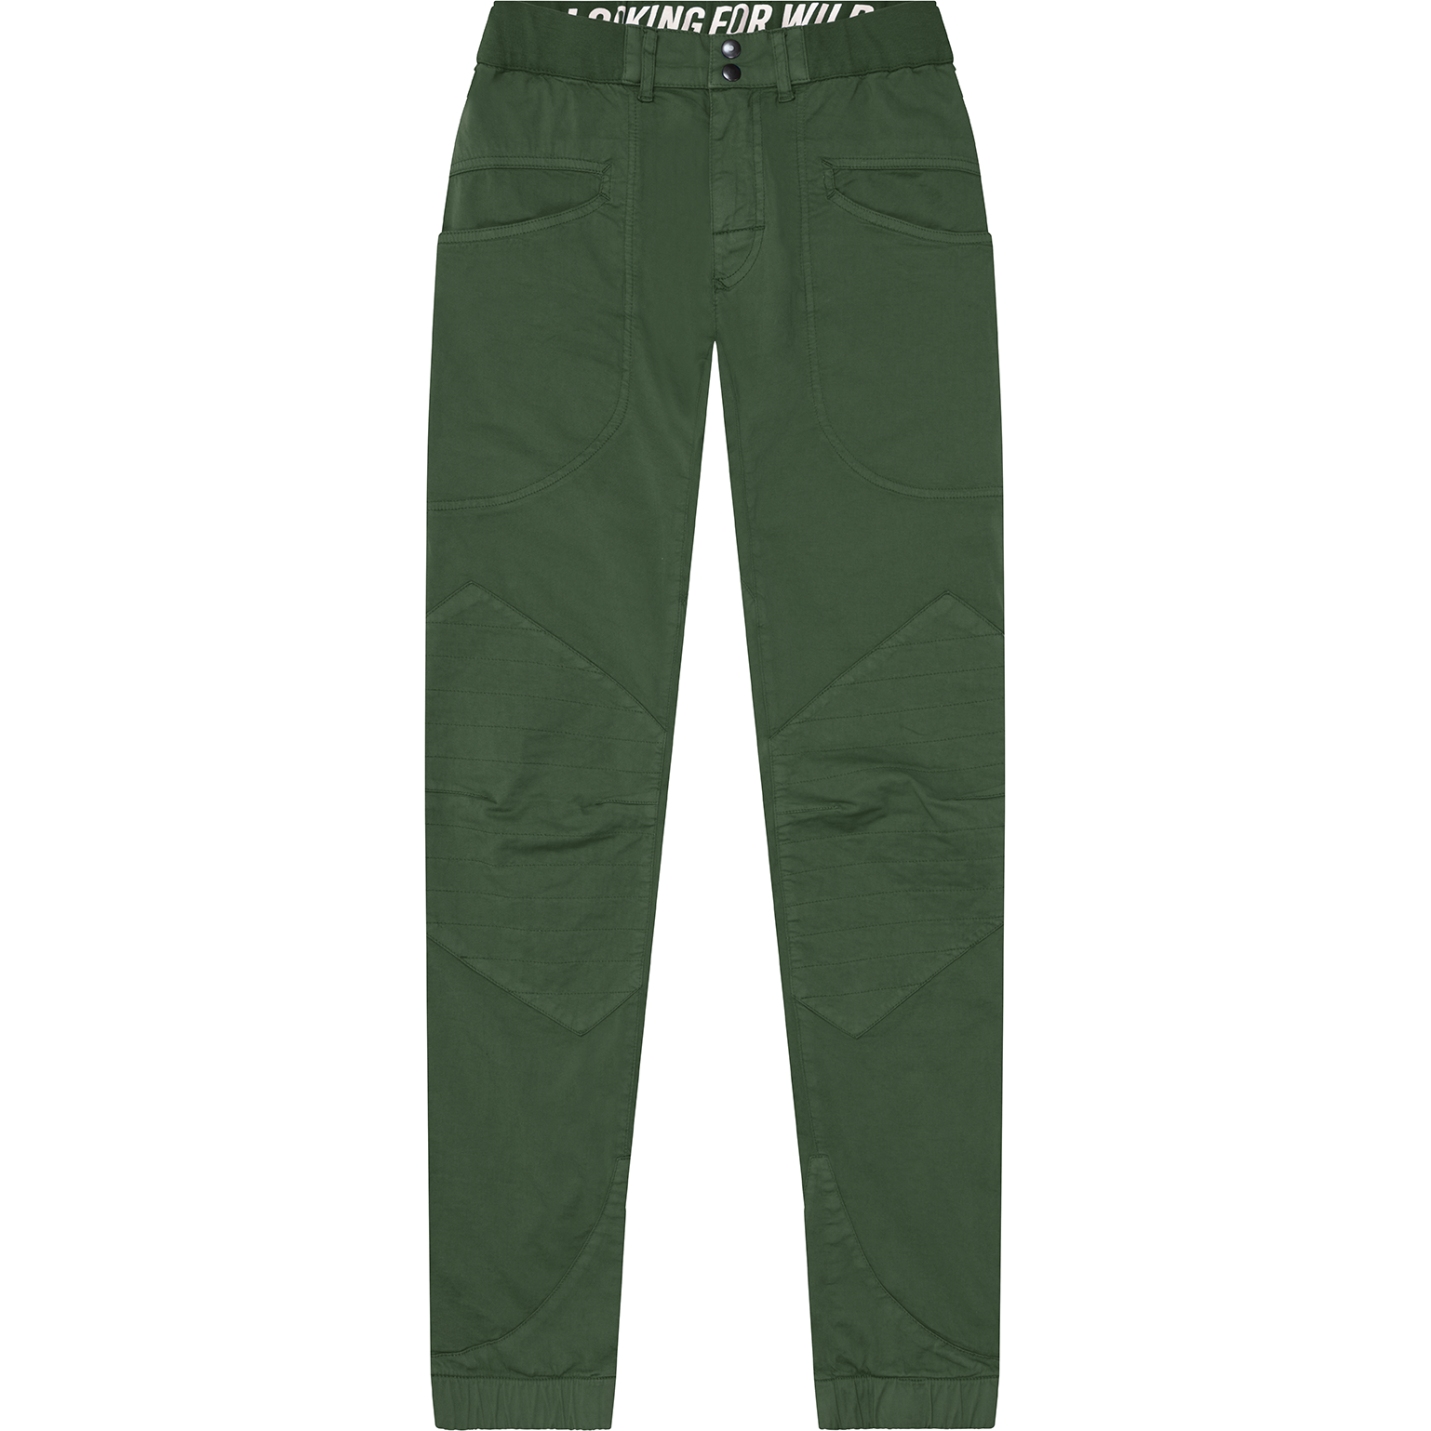 Picture of LOOKING FOR WILD Fitz Roy Men&#039;s Pants - Black Forest